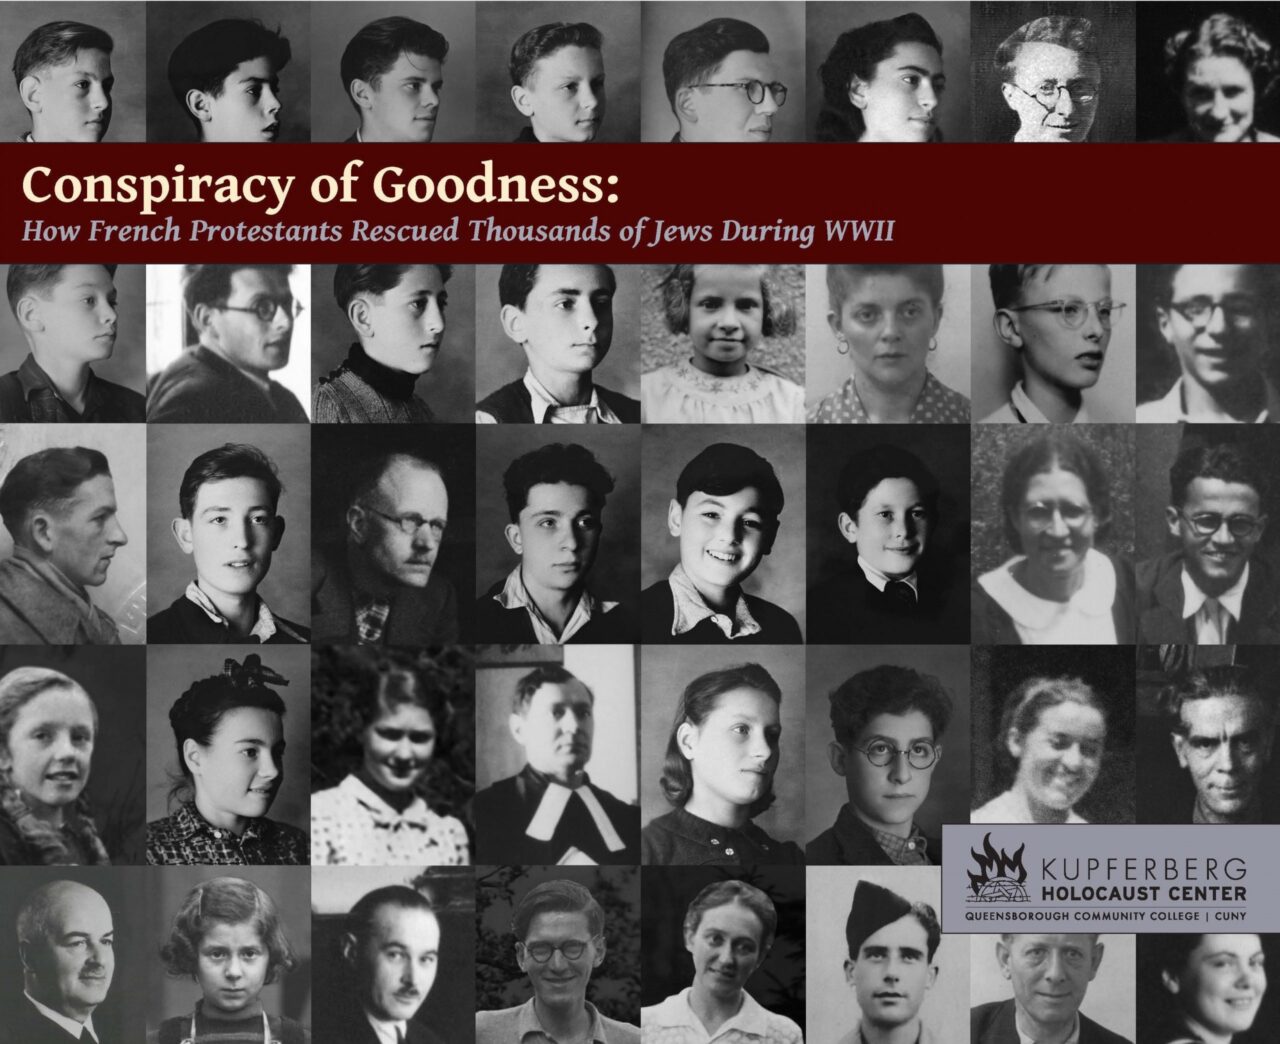 Cover Image of the KHC's 'Conspiracy of Goodness' exhibition catalog